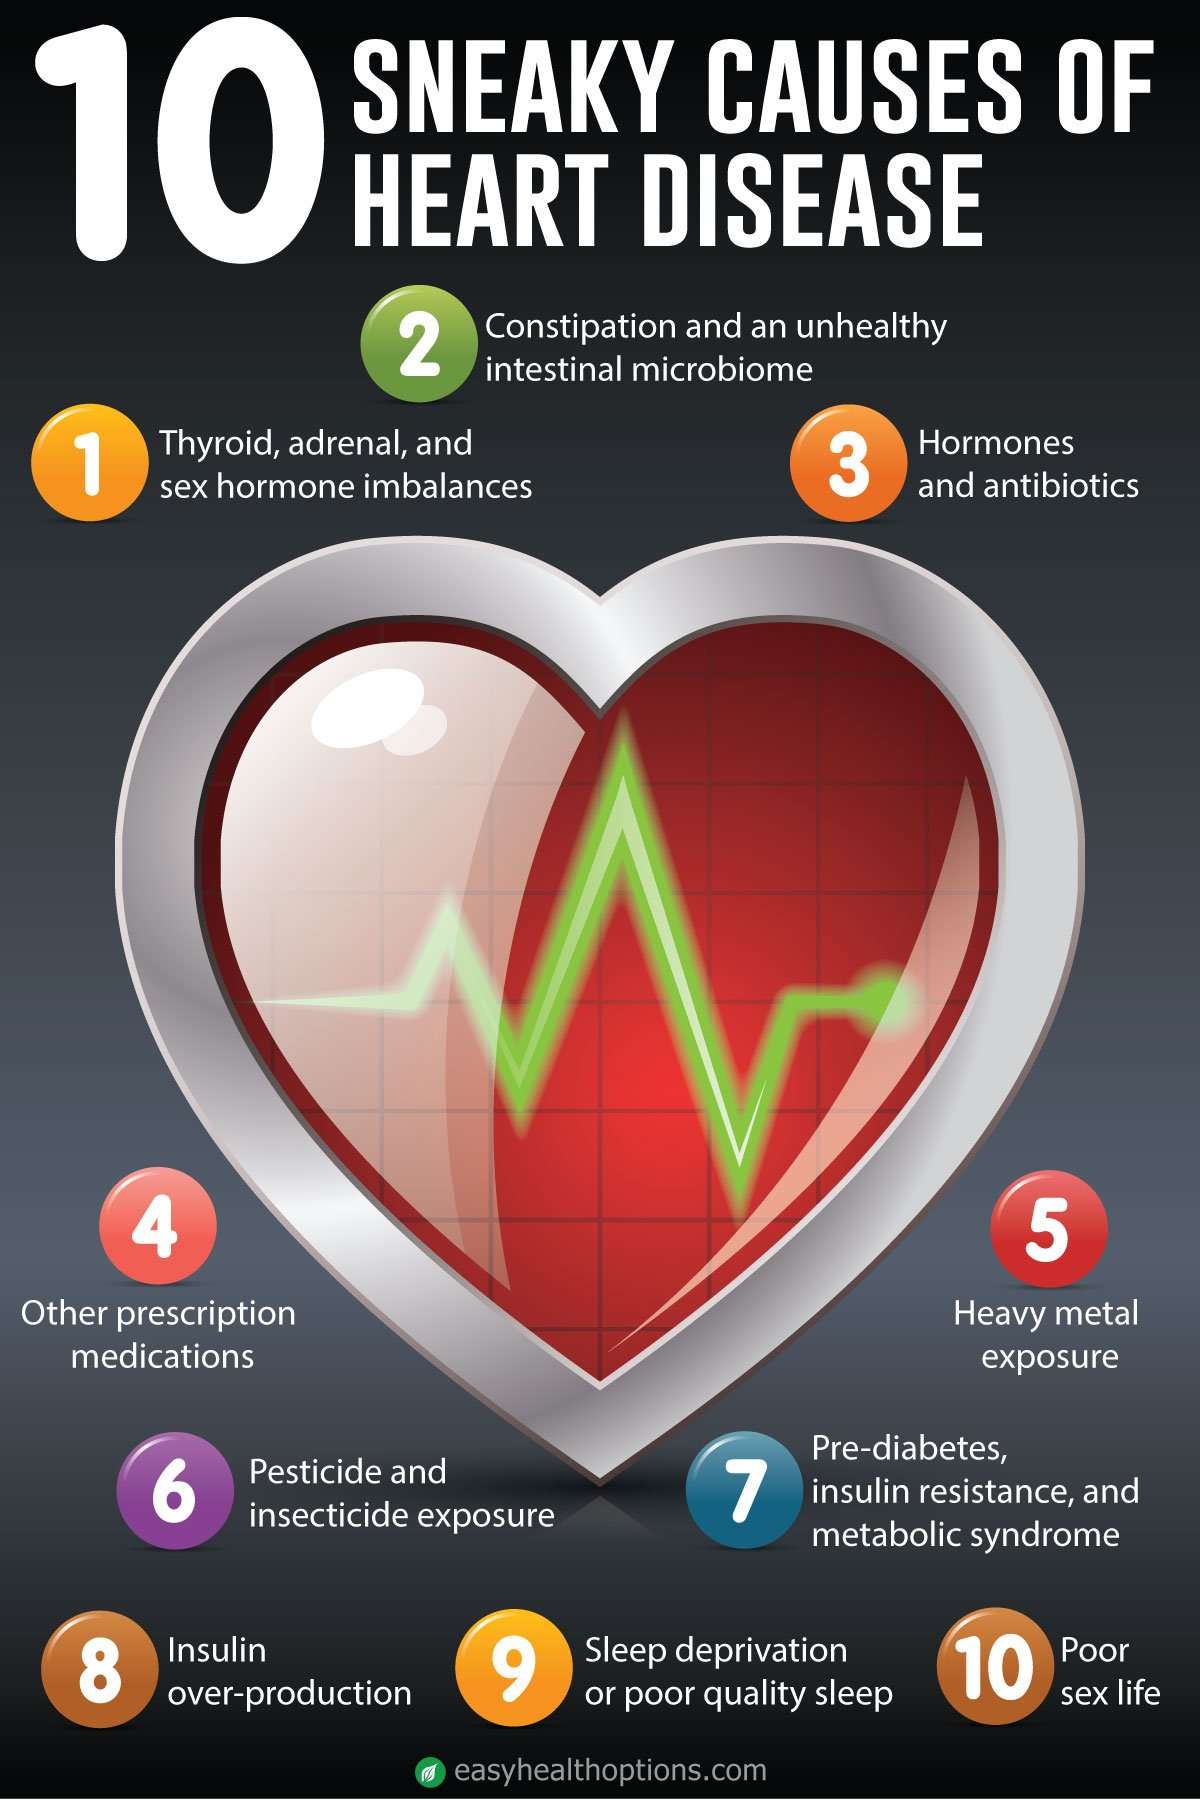 10 sneaky causes of heart disease [infographic]